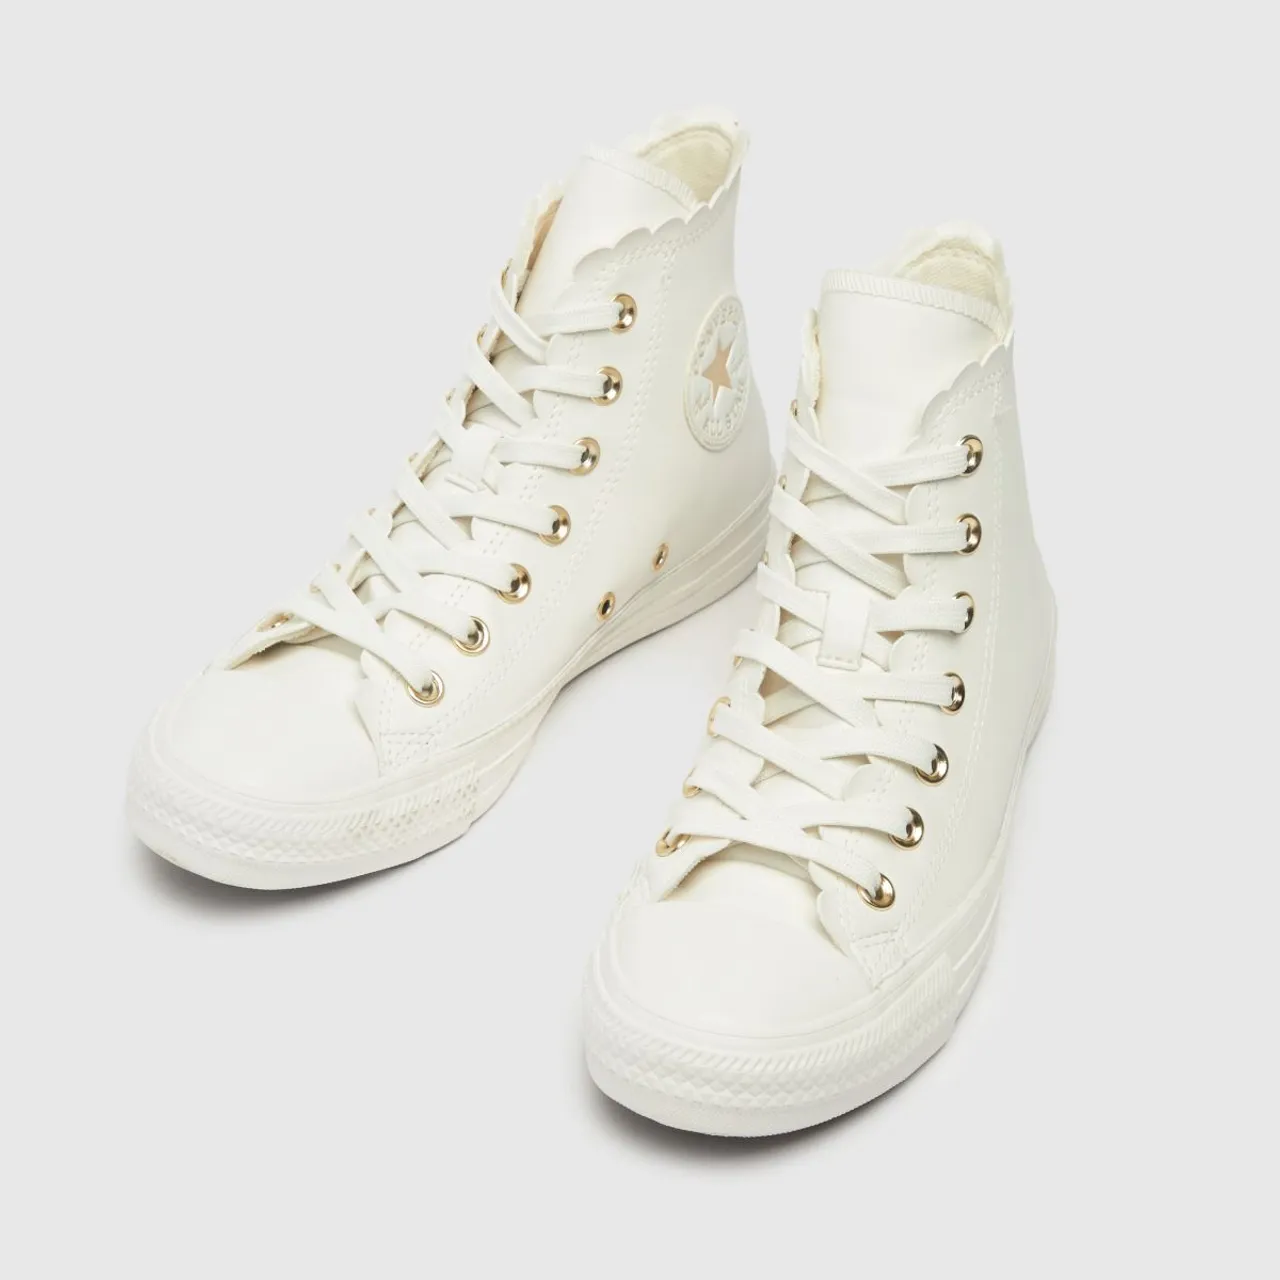 Converse All Star Hi Trainers In White & Gold